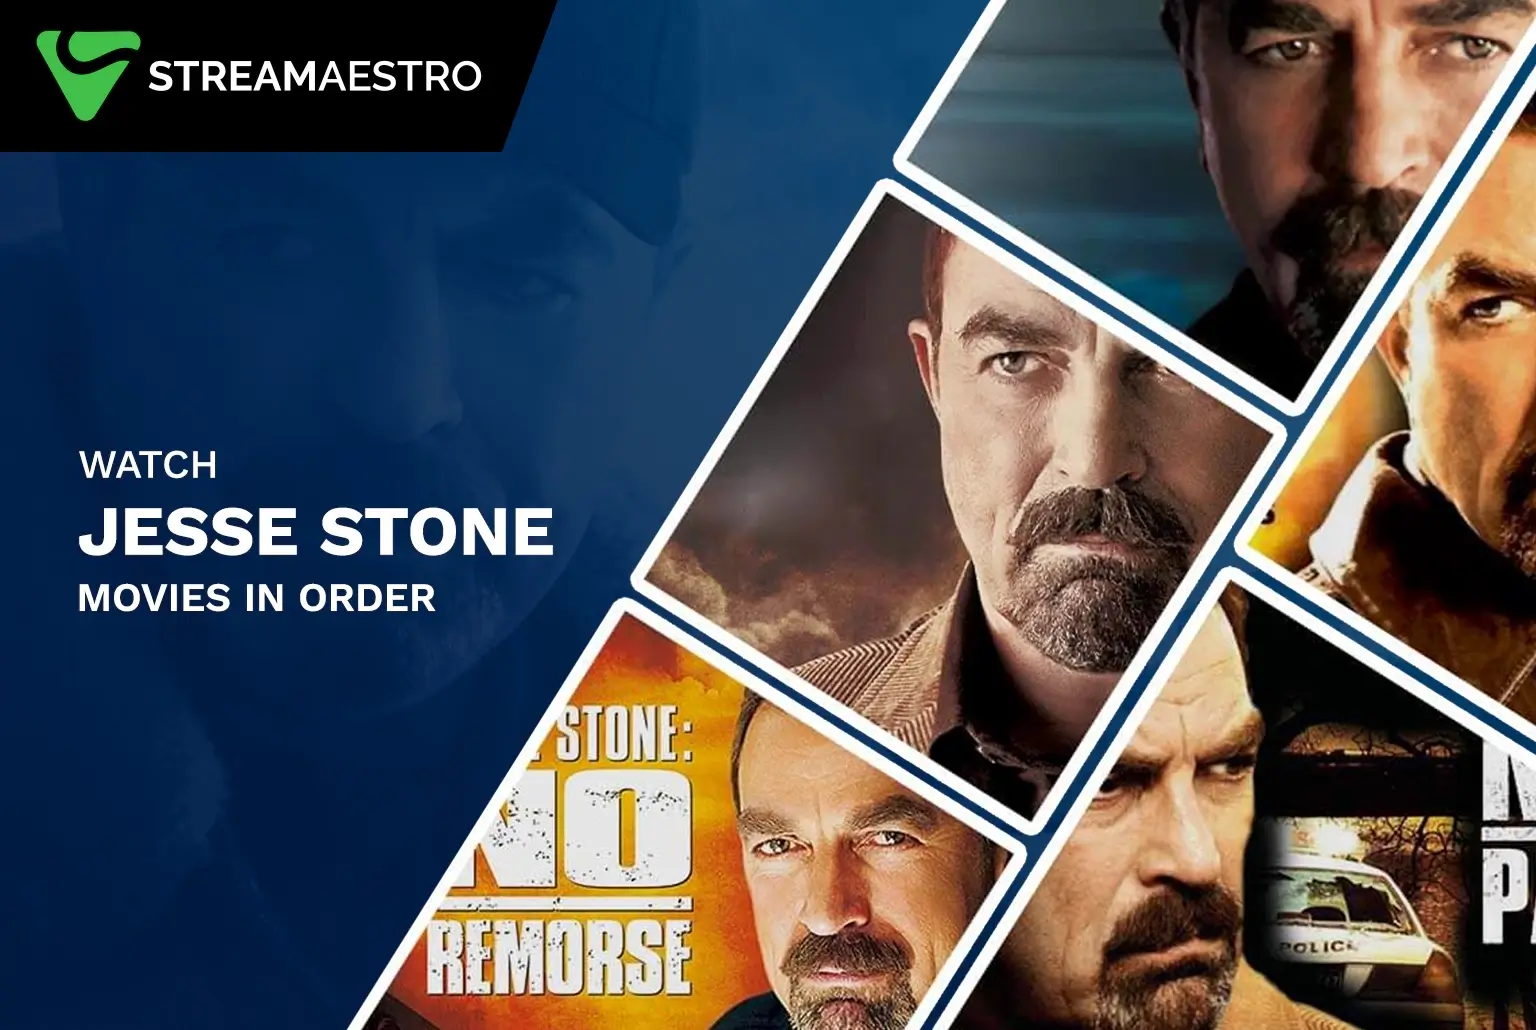 Watch Jesse Stone Movies in Order